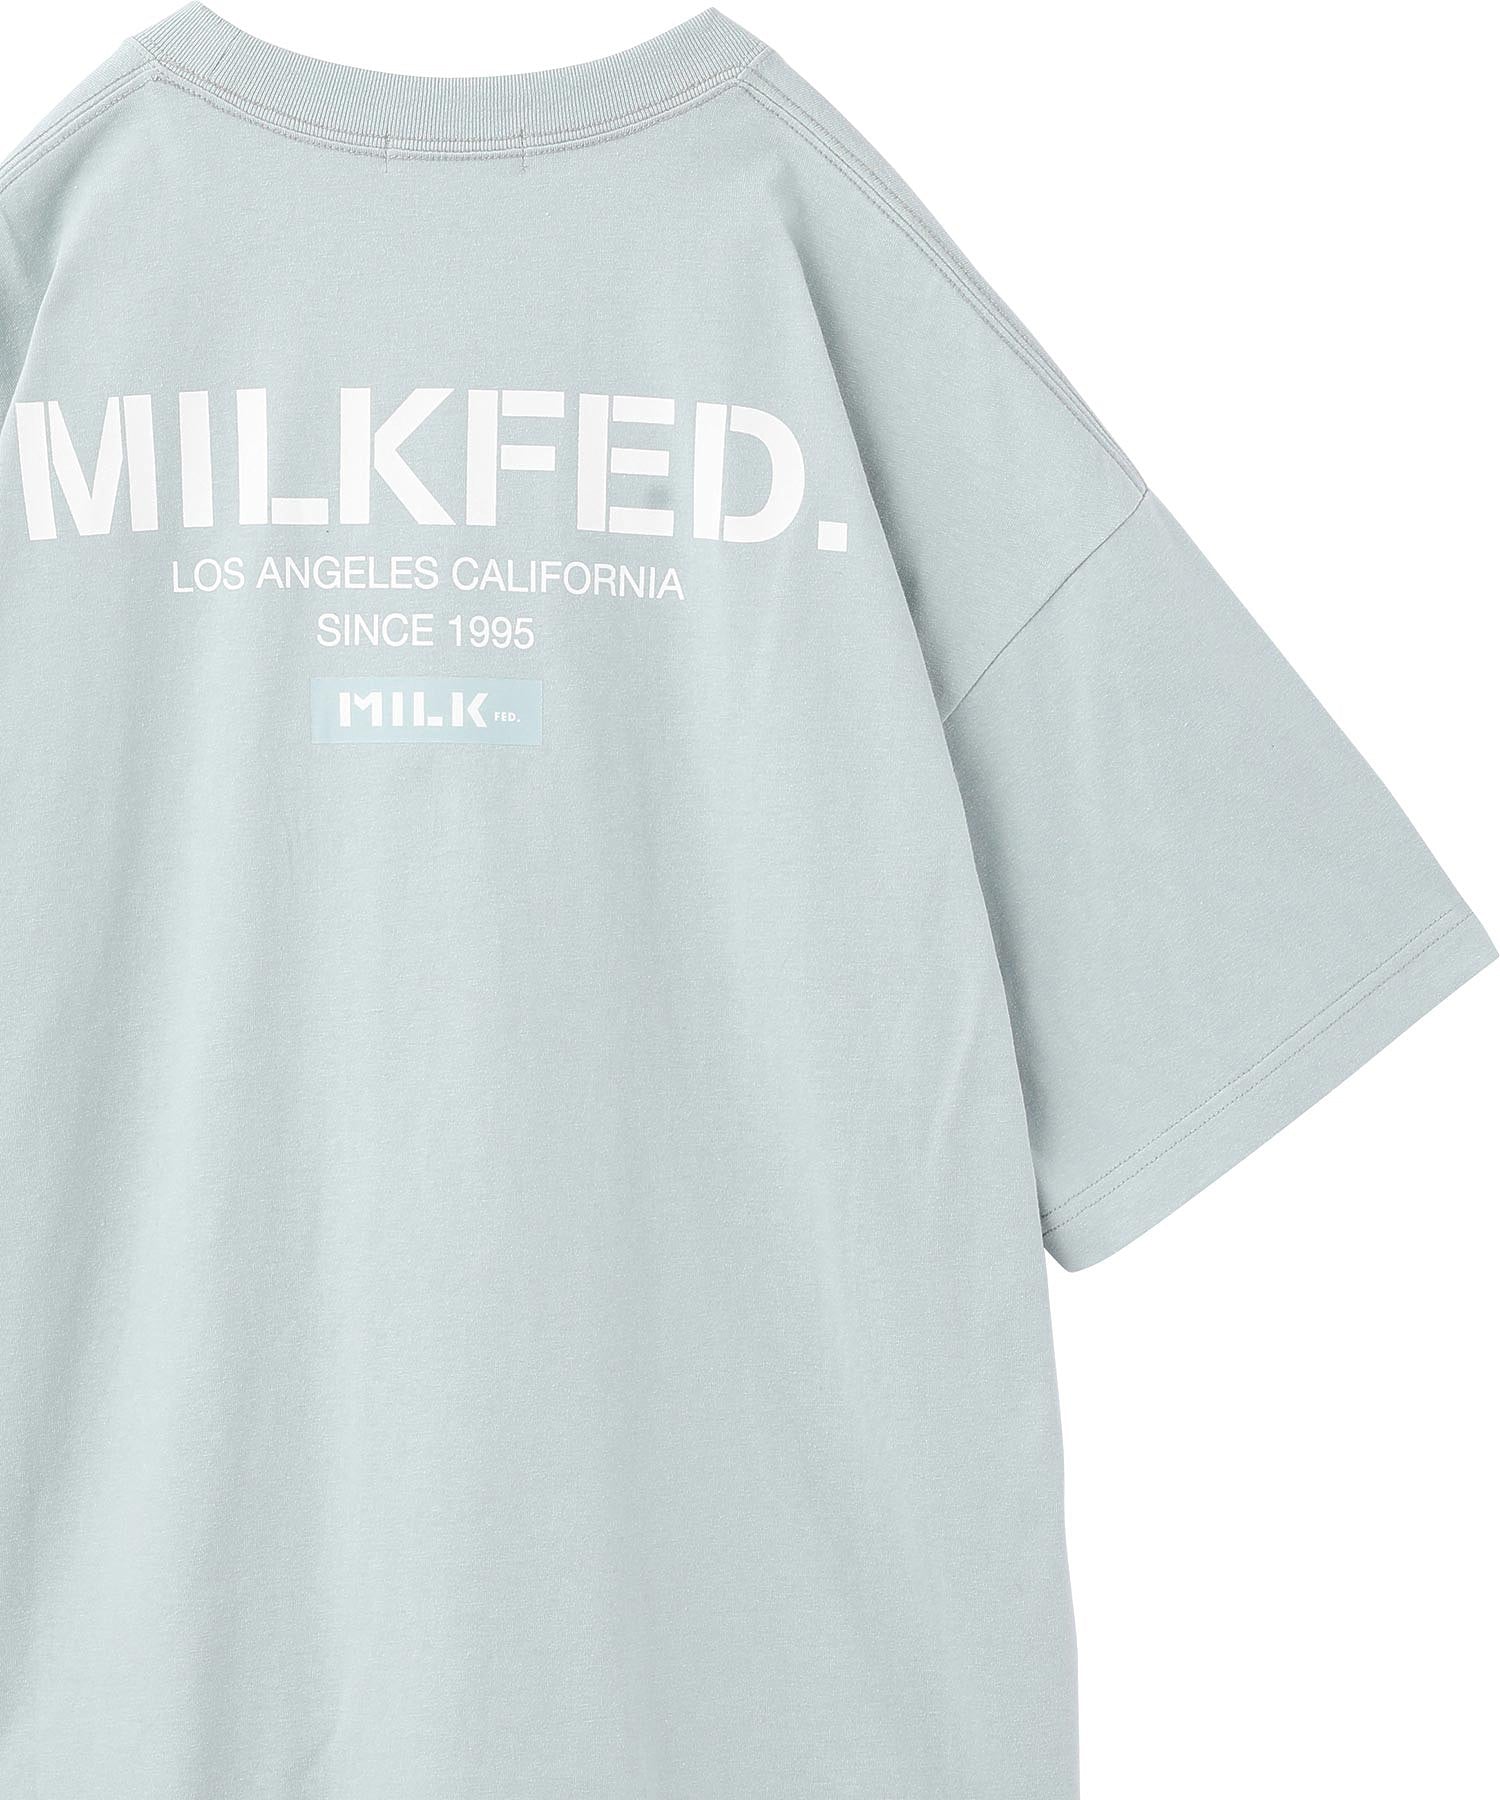 BAR AND STENCIL LOGO WIDE S/S TEE MILKFED.